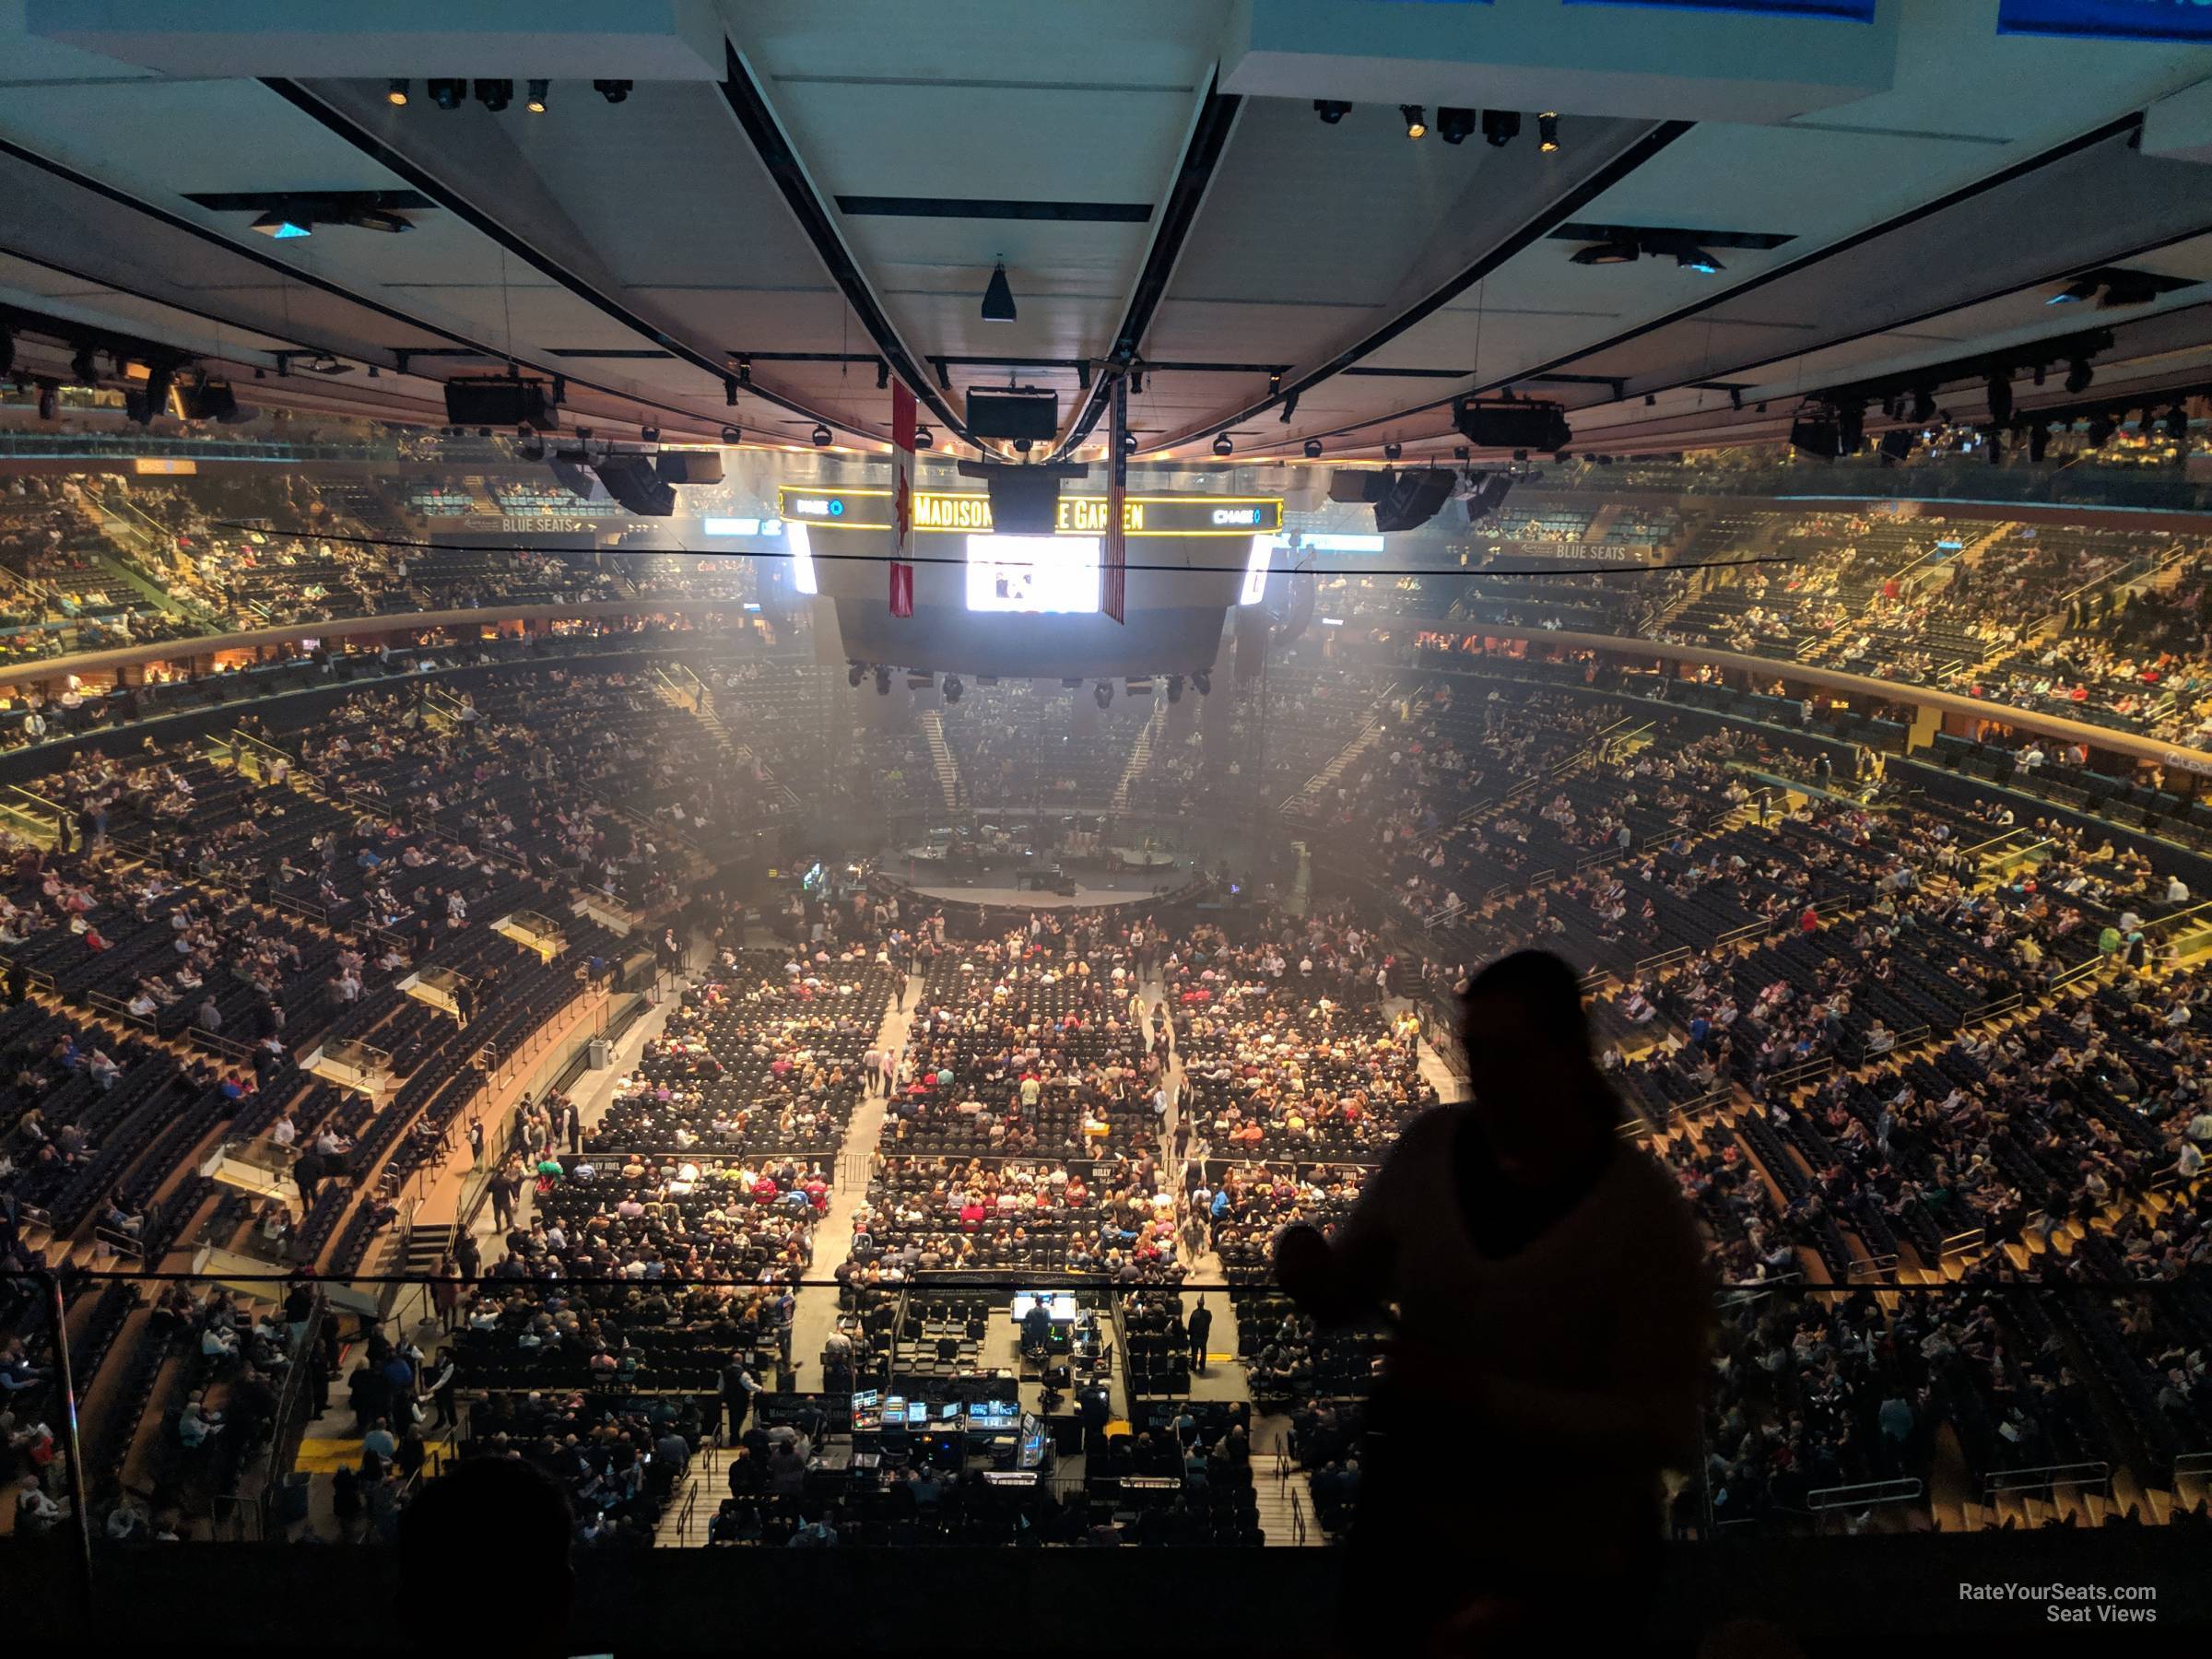 Section 305 at Madison Square Garden